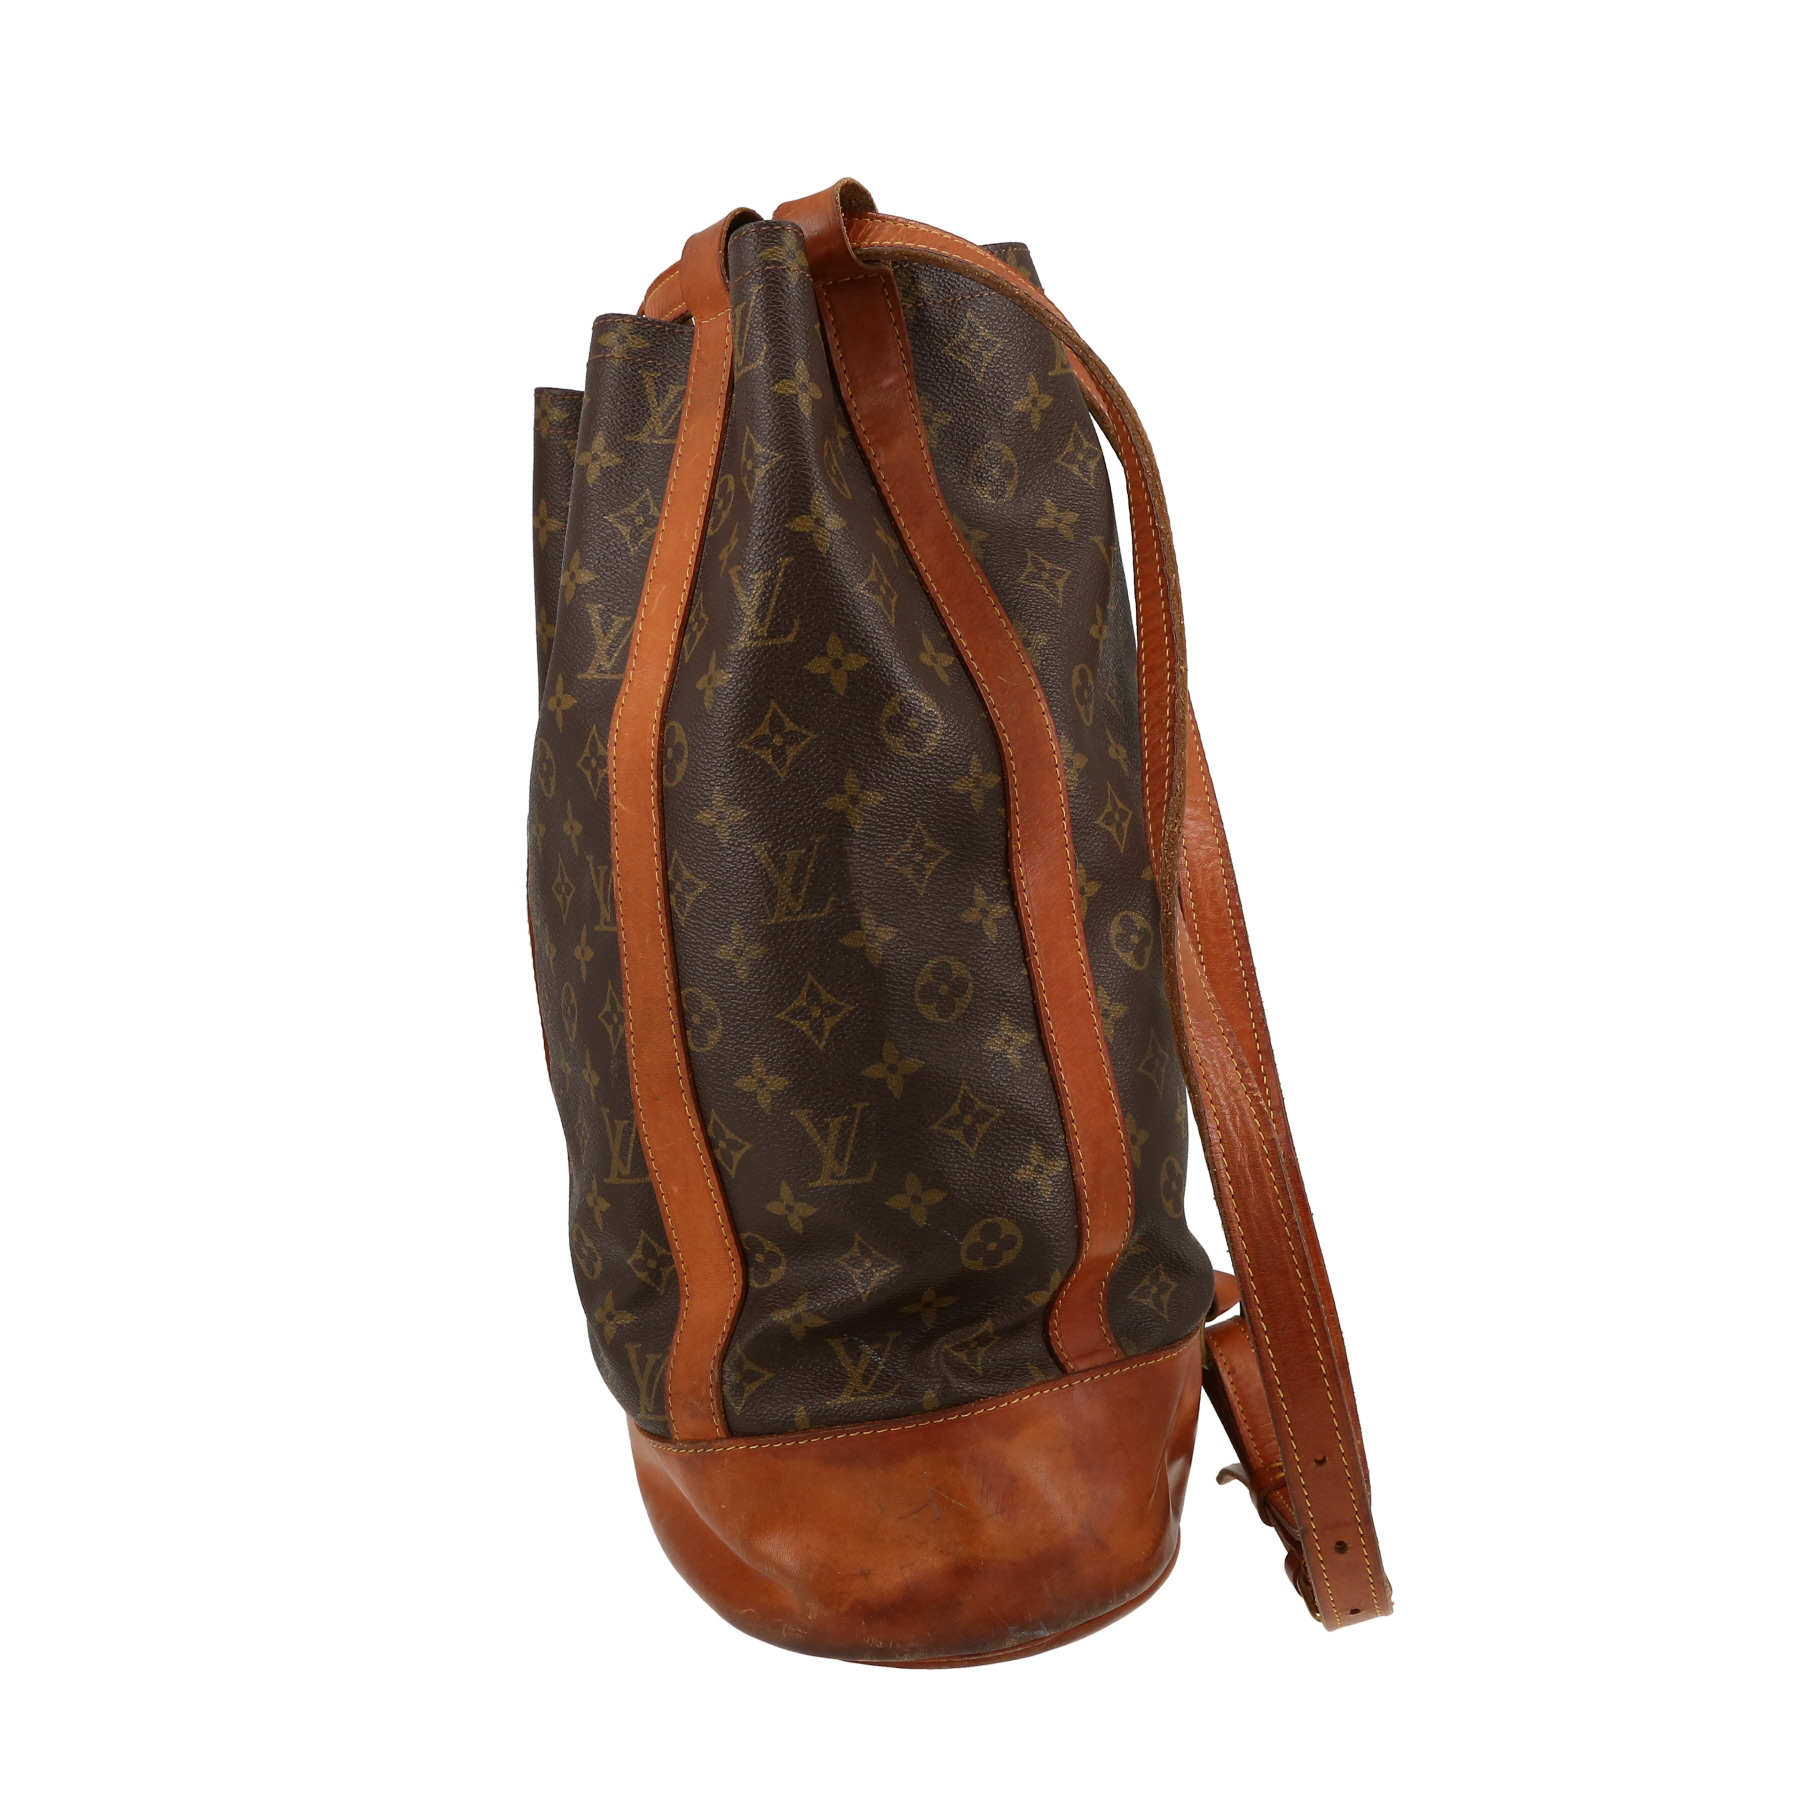 Randonnée Backpack In Brown Monogram Canvas And